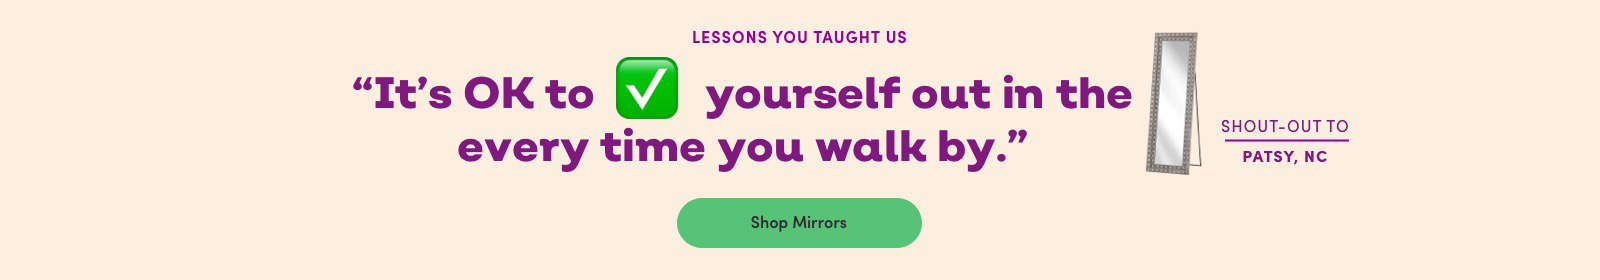 Lessons You Taught Us: "It's OK to check yourself out in the mirror when you walk by." Shop Mirrors